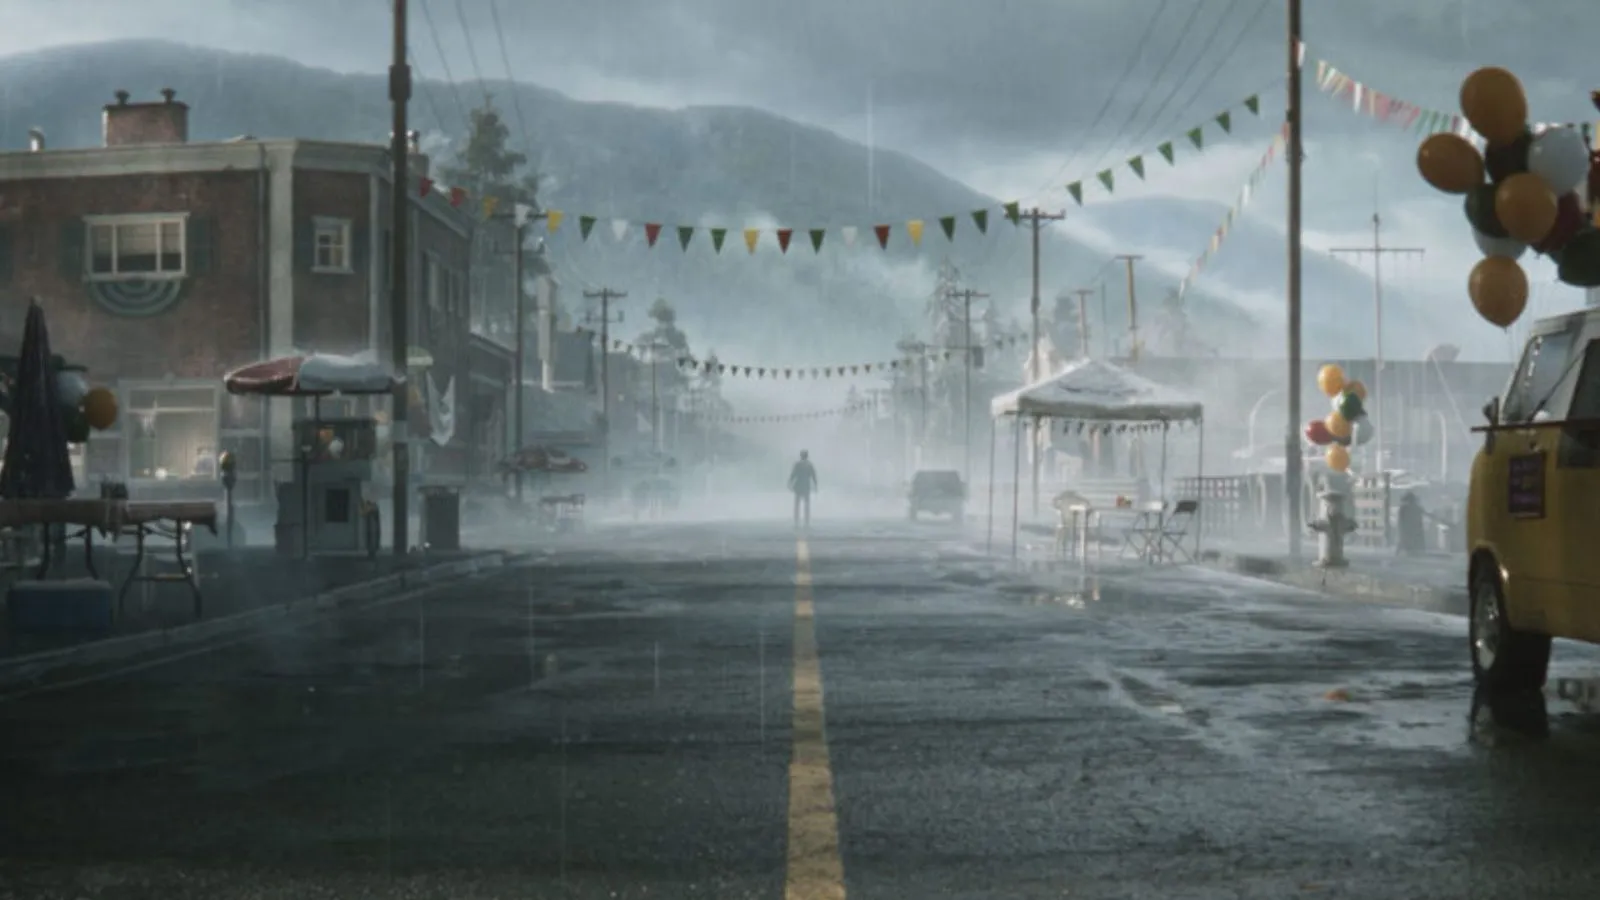 Alan Wake 2 PC requirements, Minimum & recommended specs